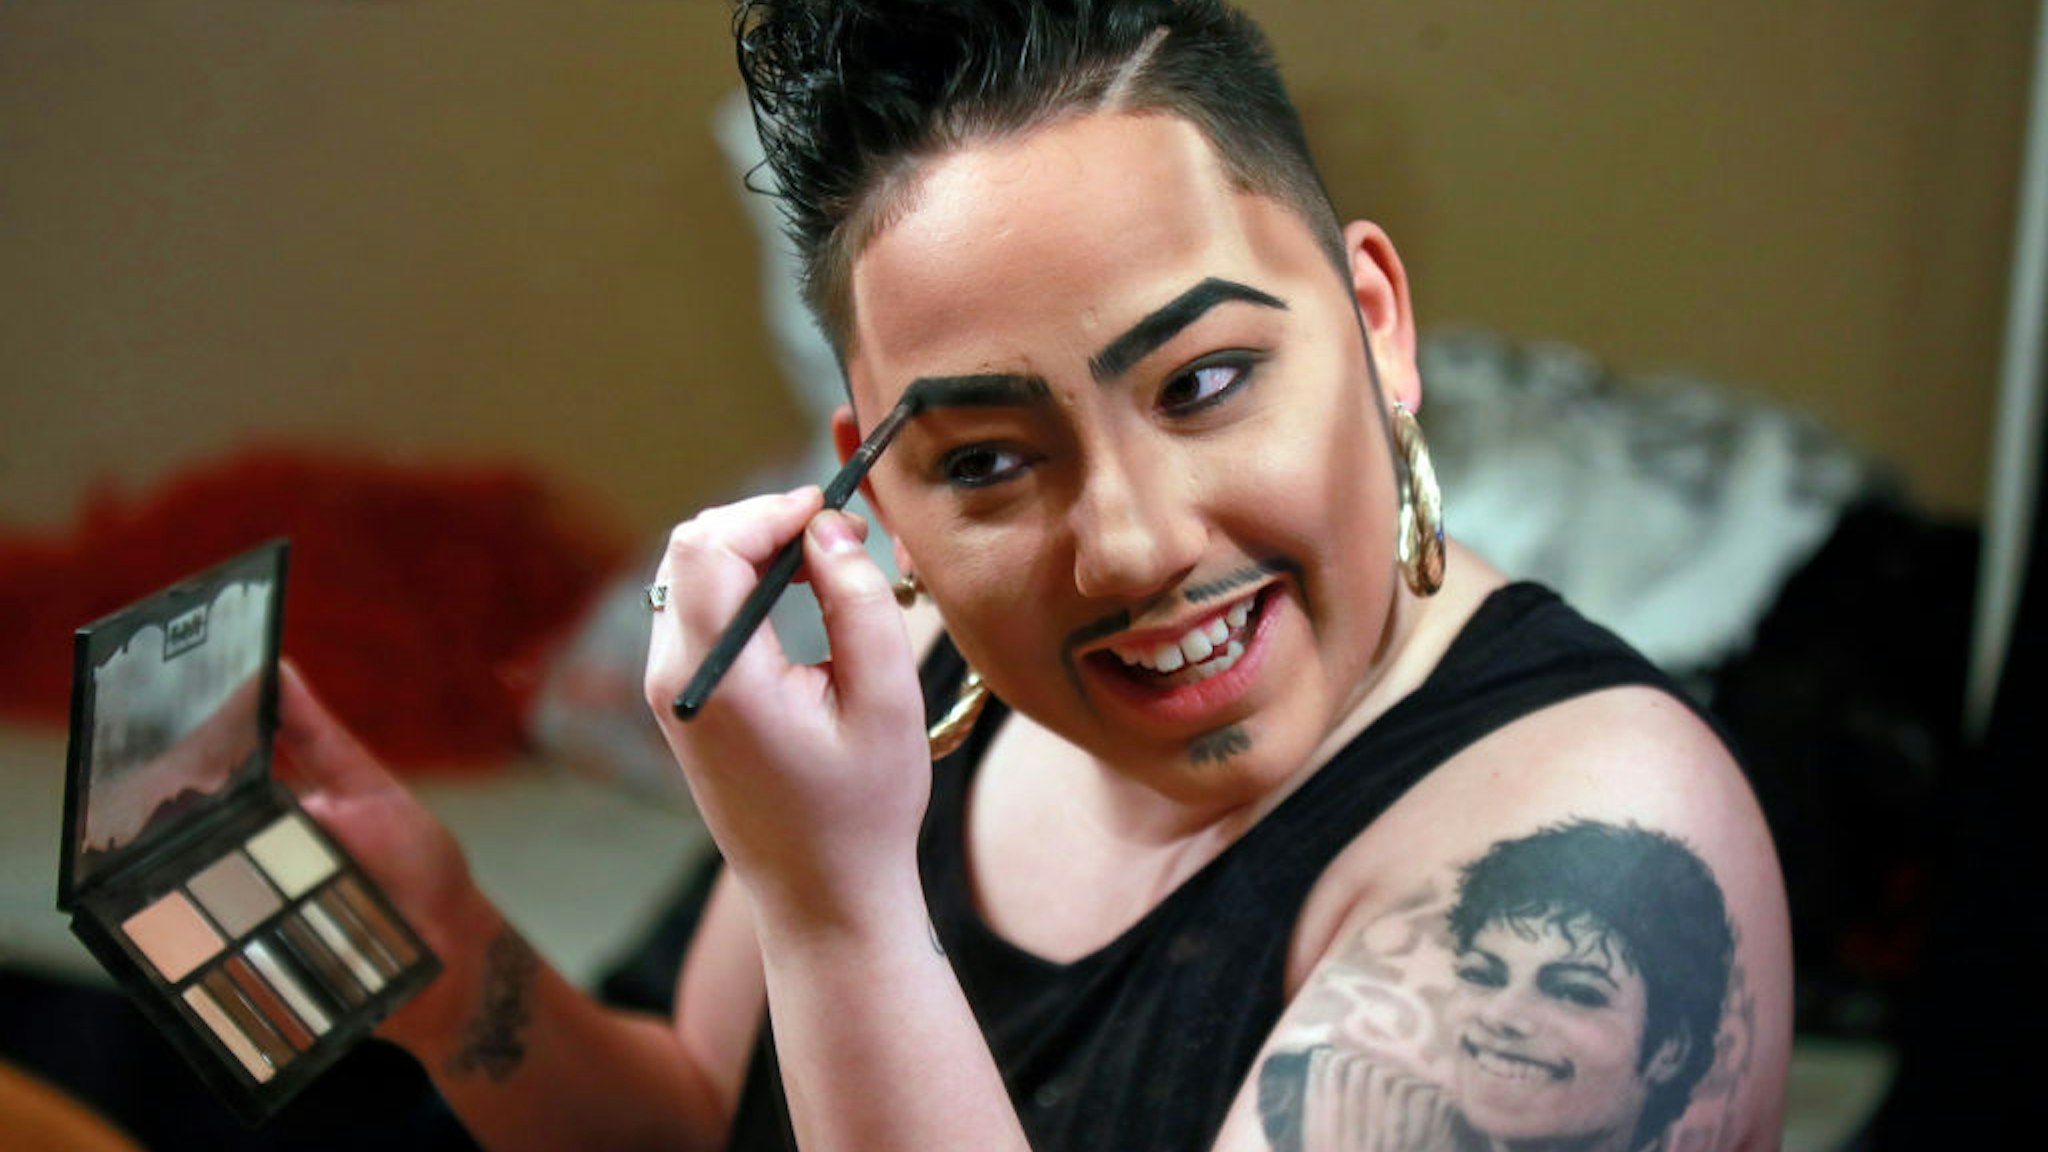 Janelle Felix finishes her make up before she performs as drag king Tenderoni on Saturday, March 24, 2018 at Berlin's "Drag Matinee." (Nuccio DiNuzzo/Chicago Tribune/Tribune News Service via Getty Images)